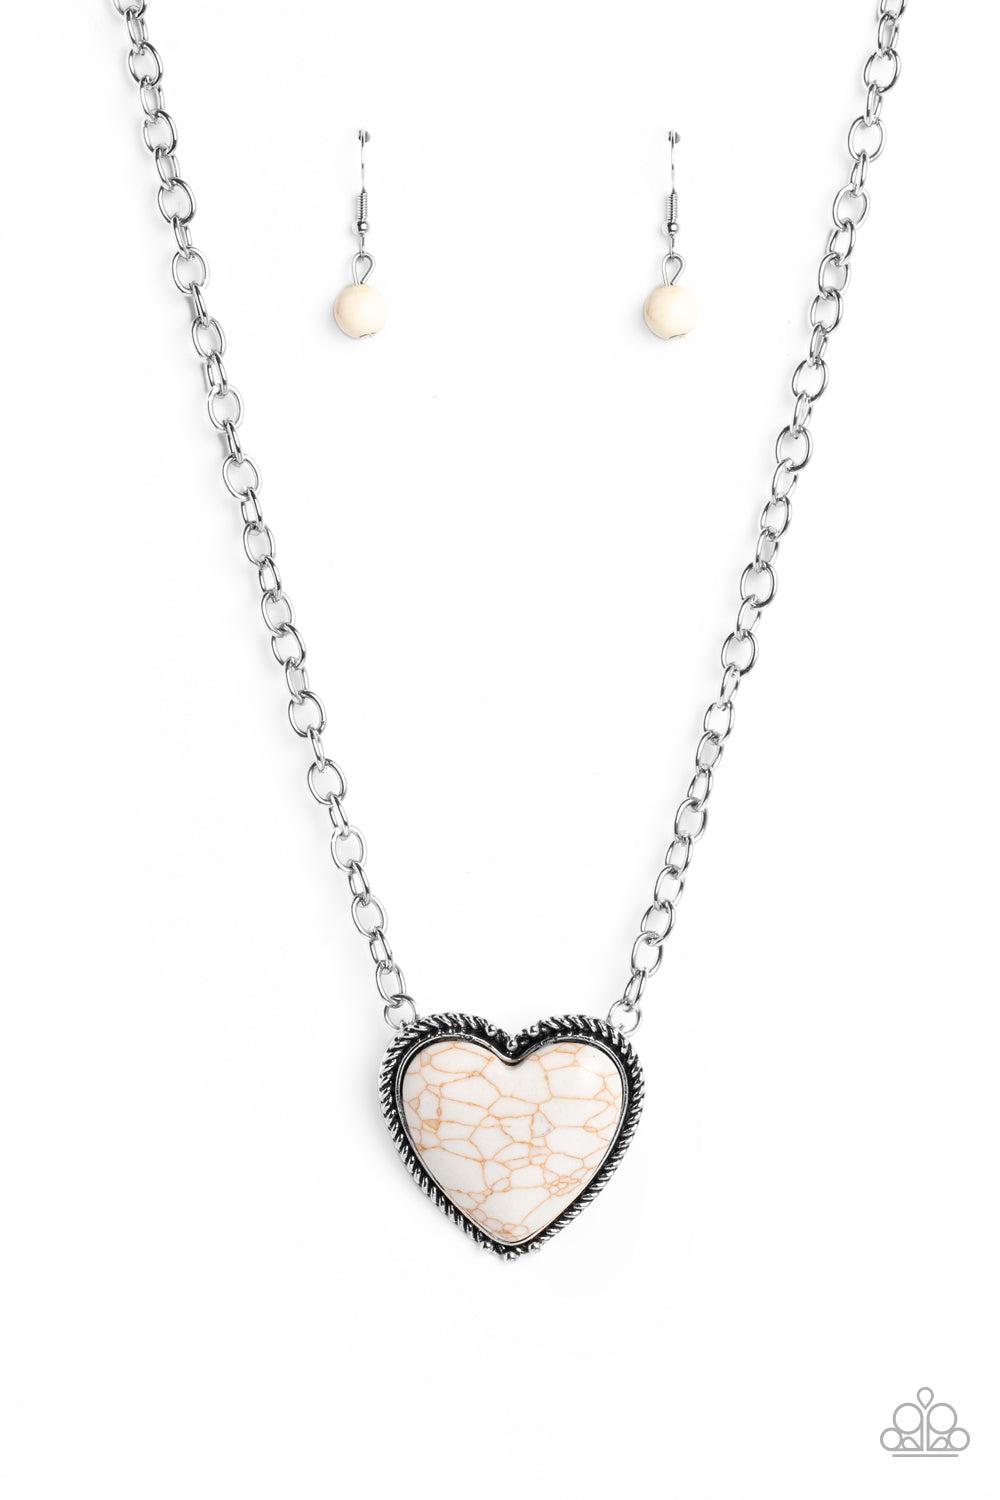 Authentic Admirer White Stone Heart Necklace - Paparazzi Accessories- lightbox - CarasShop.com - $5 Jewelry by Cara Jewels